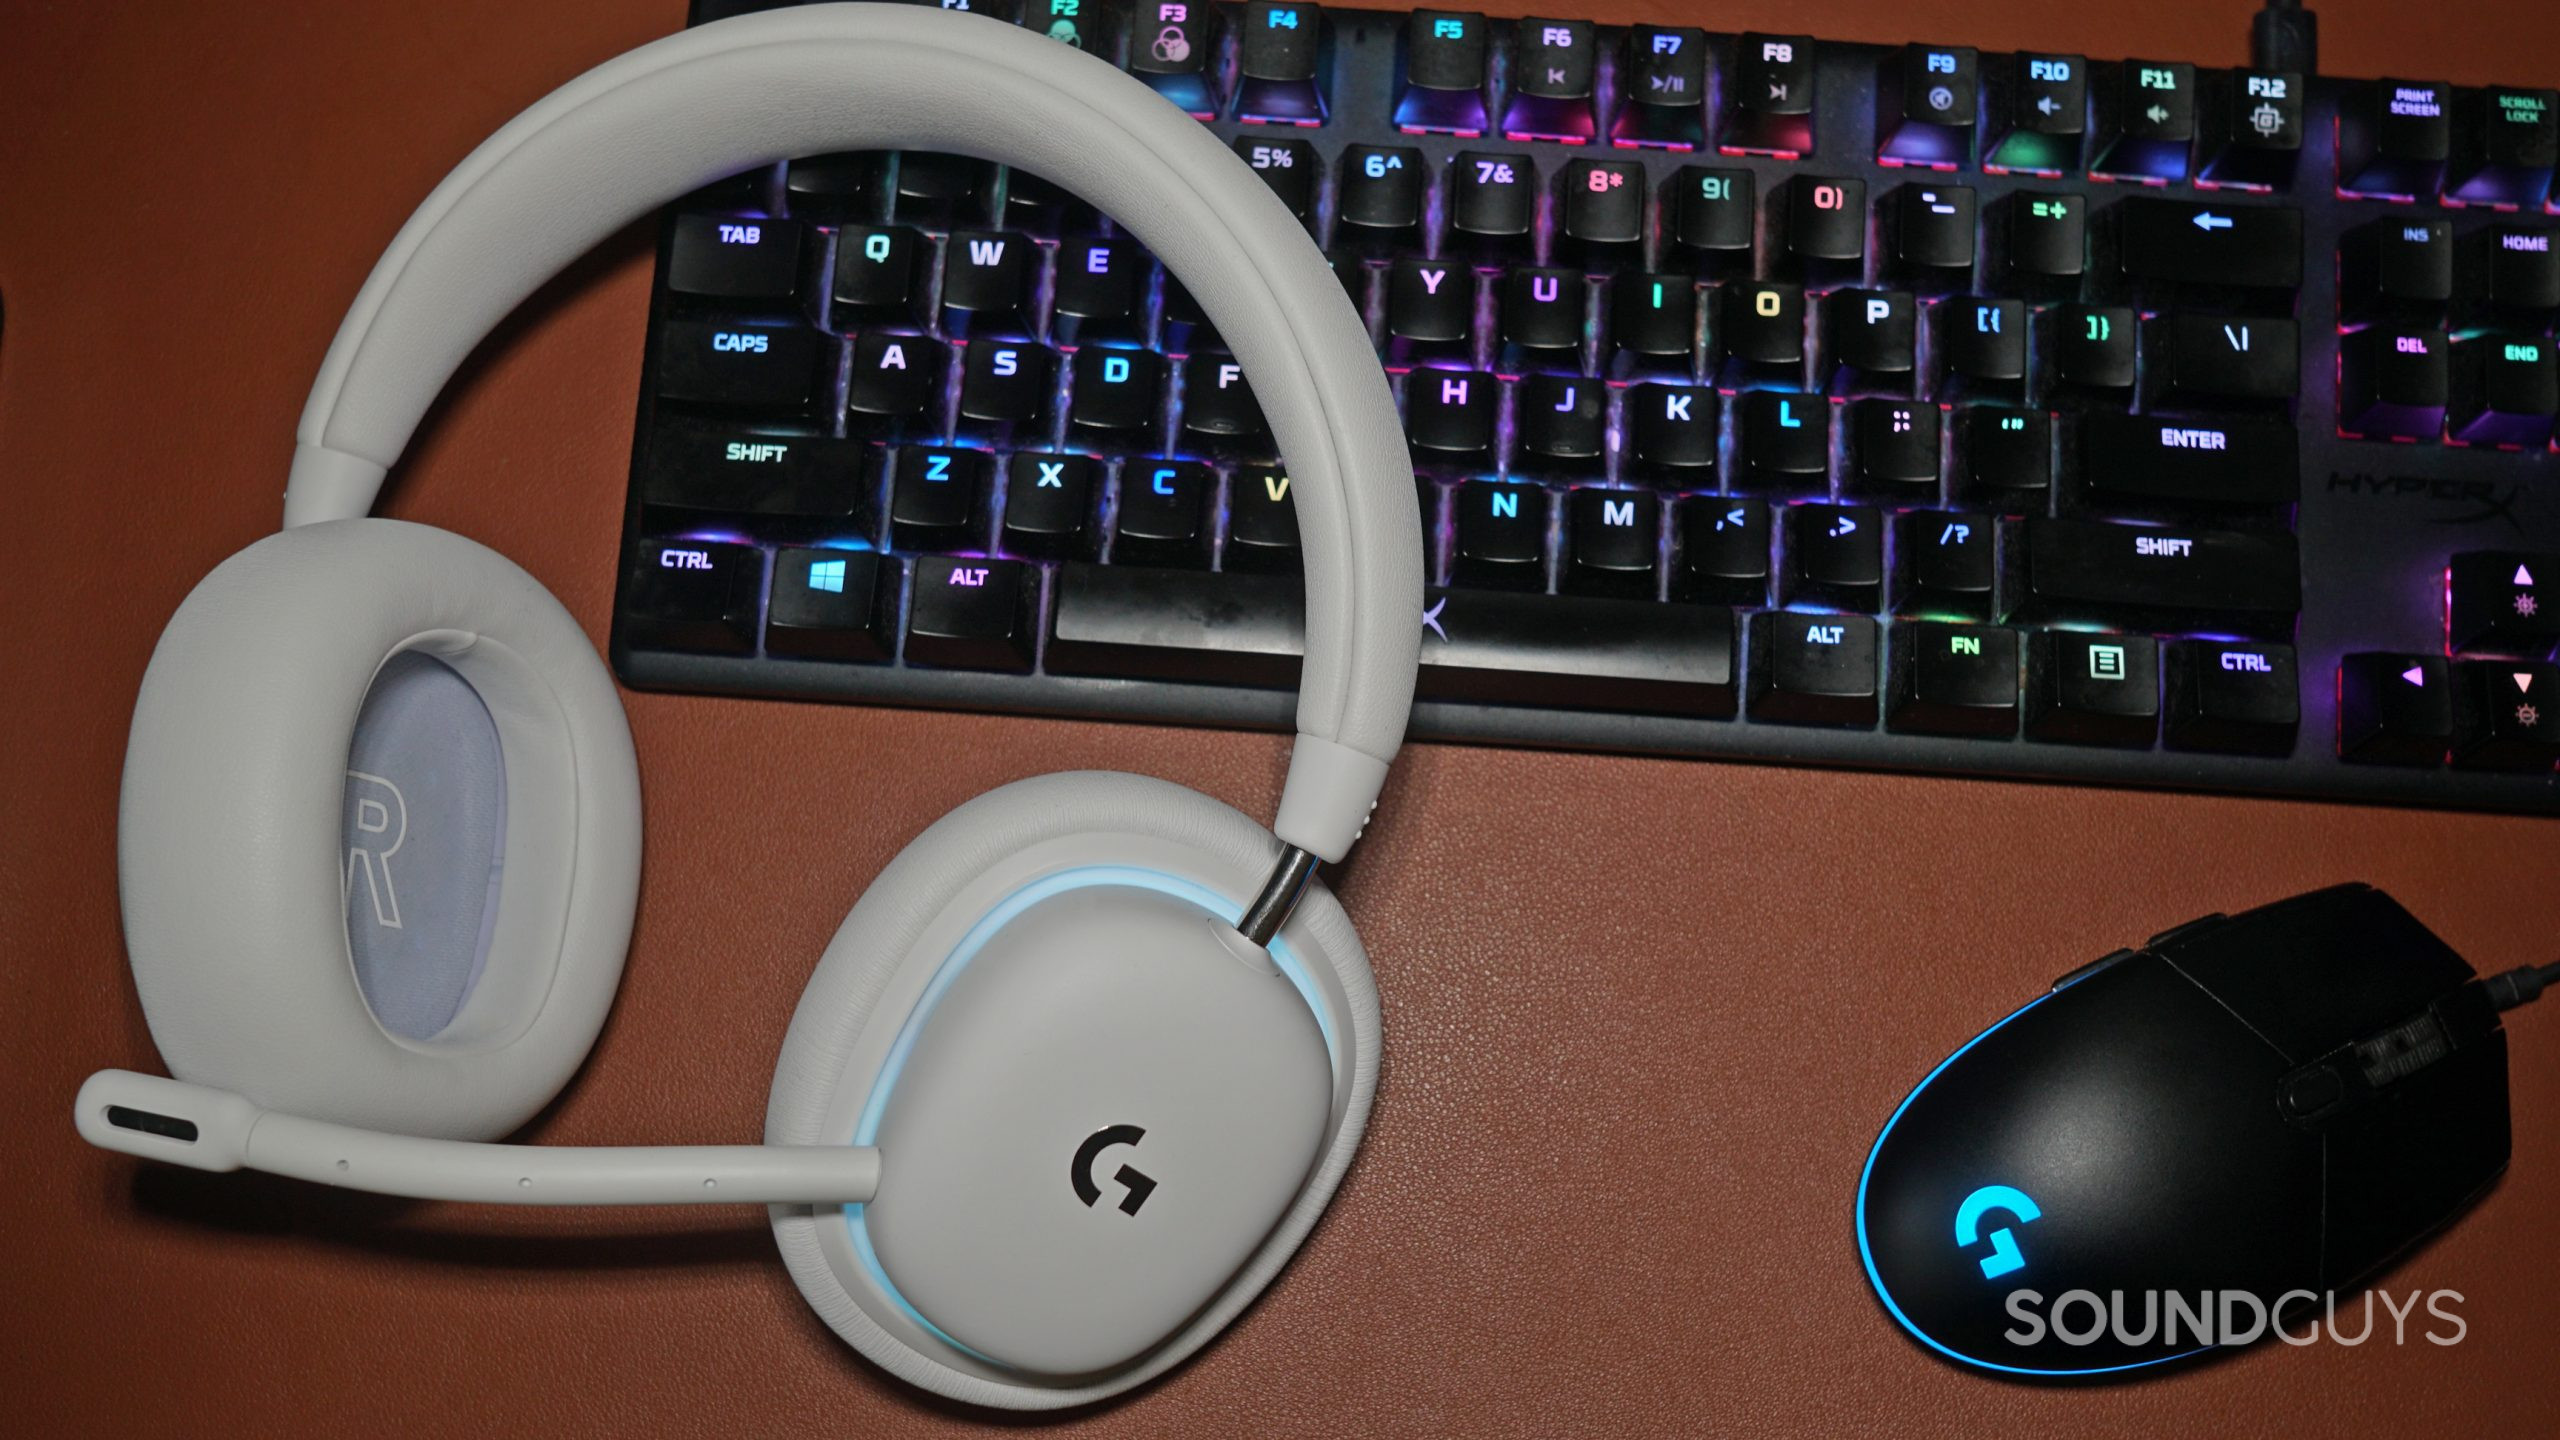 The Logitech G735 gaming headset lays on a leather surface next to a Logitech gaming mouse and a HyperX gaming keyboard.